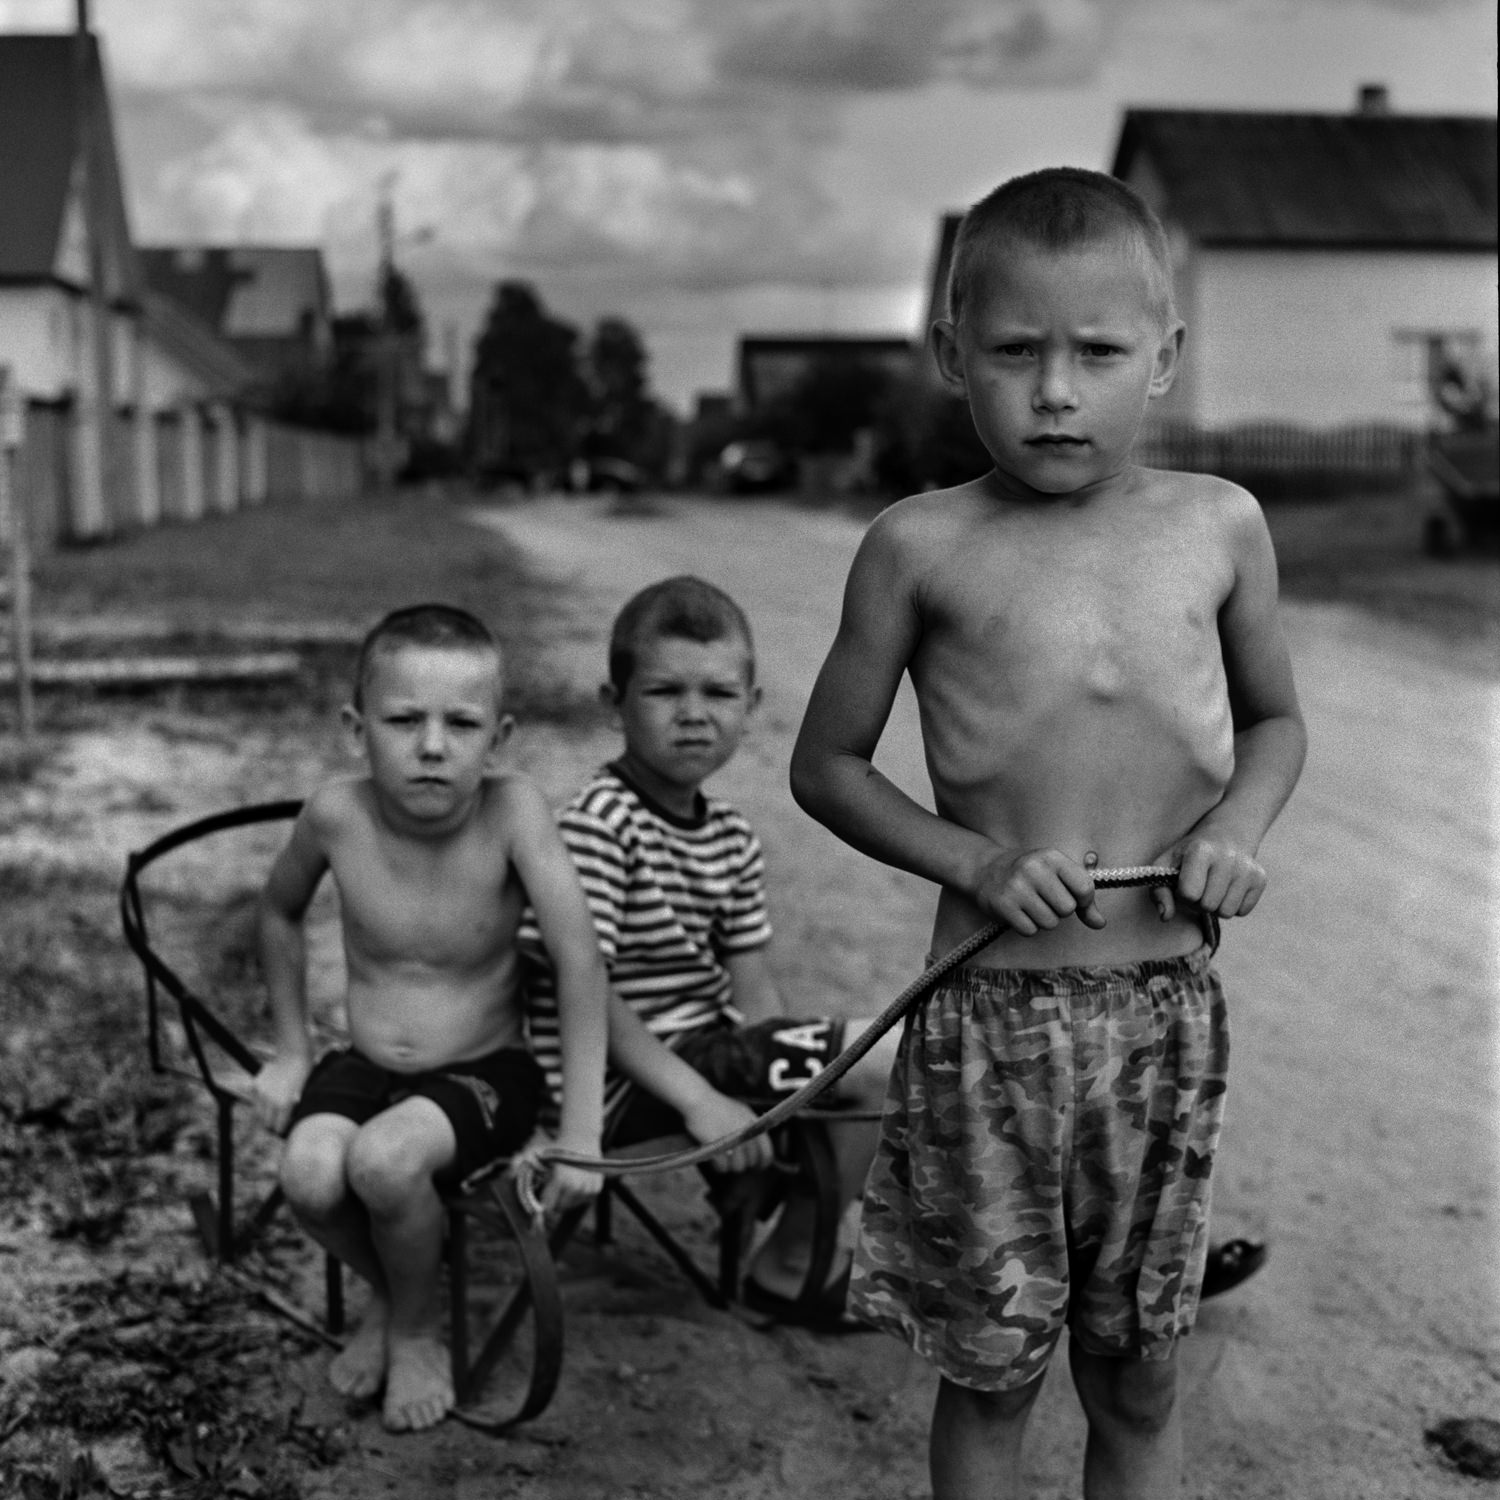 Documentary street portrait of three naked boys on countryside road with sled taken on Bronica SQ-Ai medium format camera and blac-and-white film